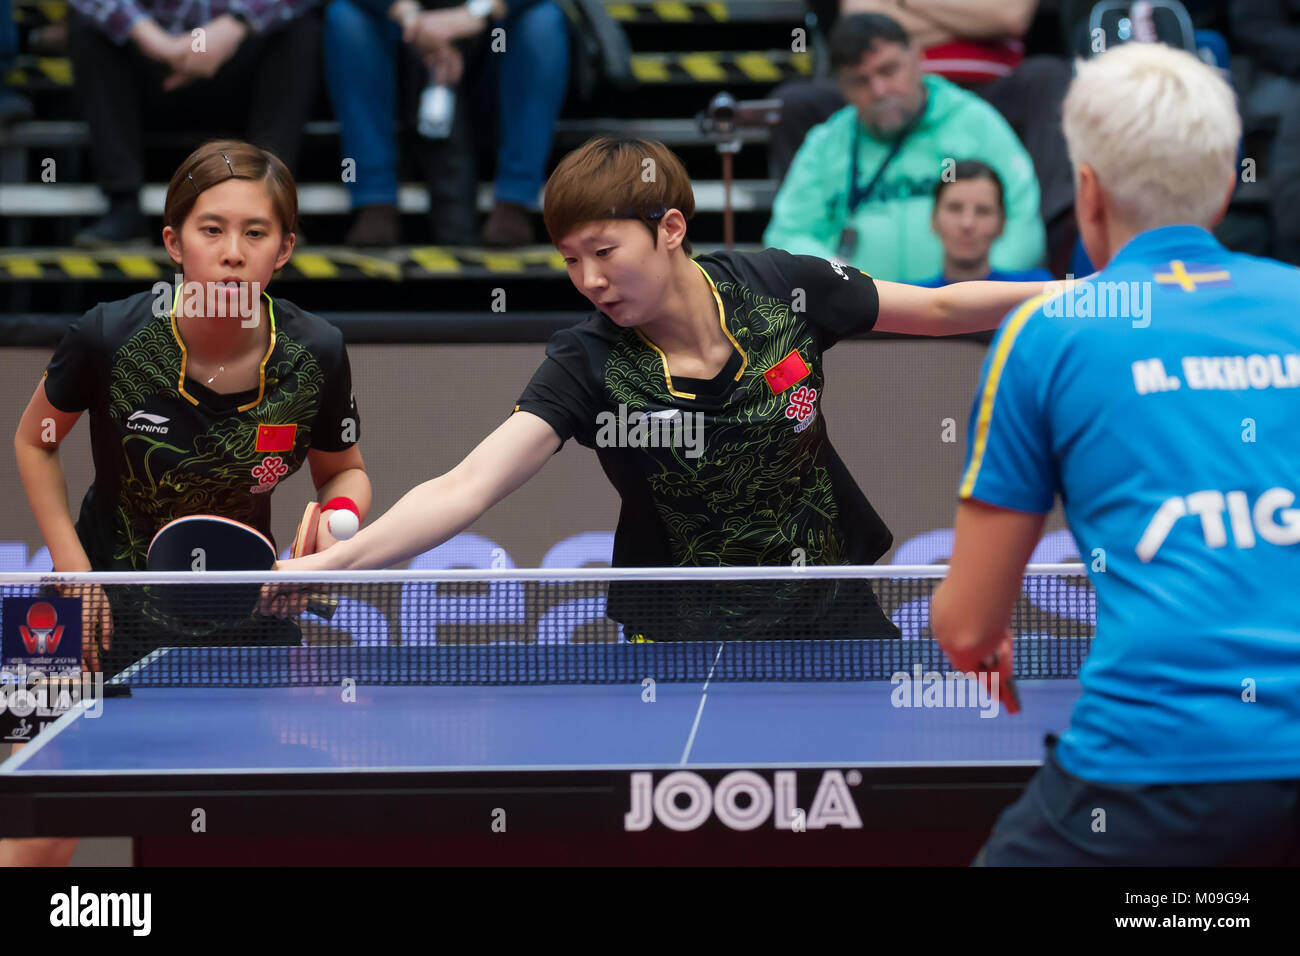 Budapest. 19th Jan, 2018. China's Chen Ke/Wang Manyu (C) compete against  Matilda Ekholm of Sweden and Georgina Pota of Hungary during the women's  doubles semi-final match at the ITTF World Tour Hungarian